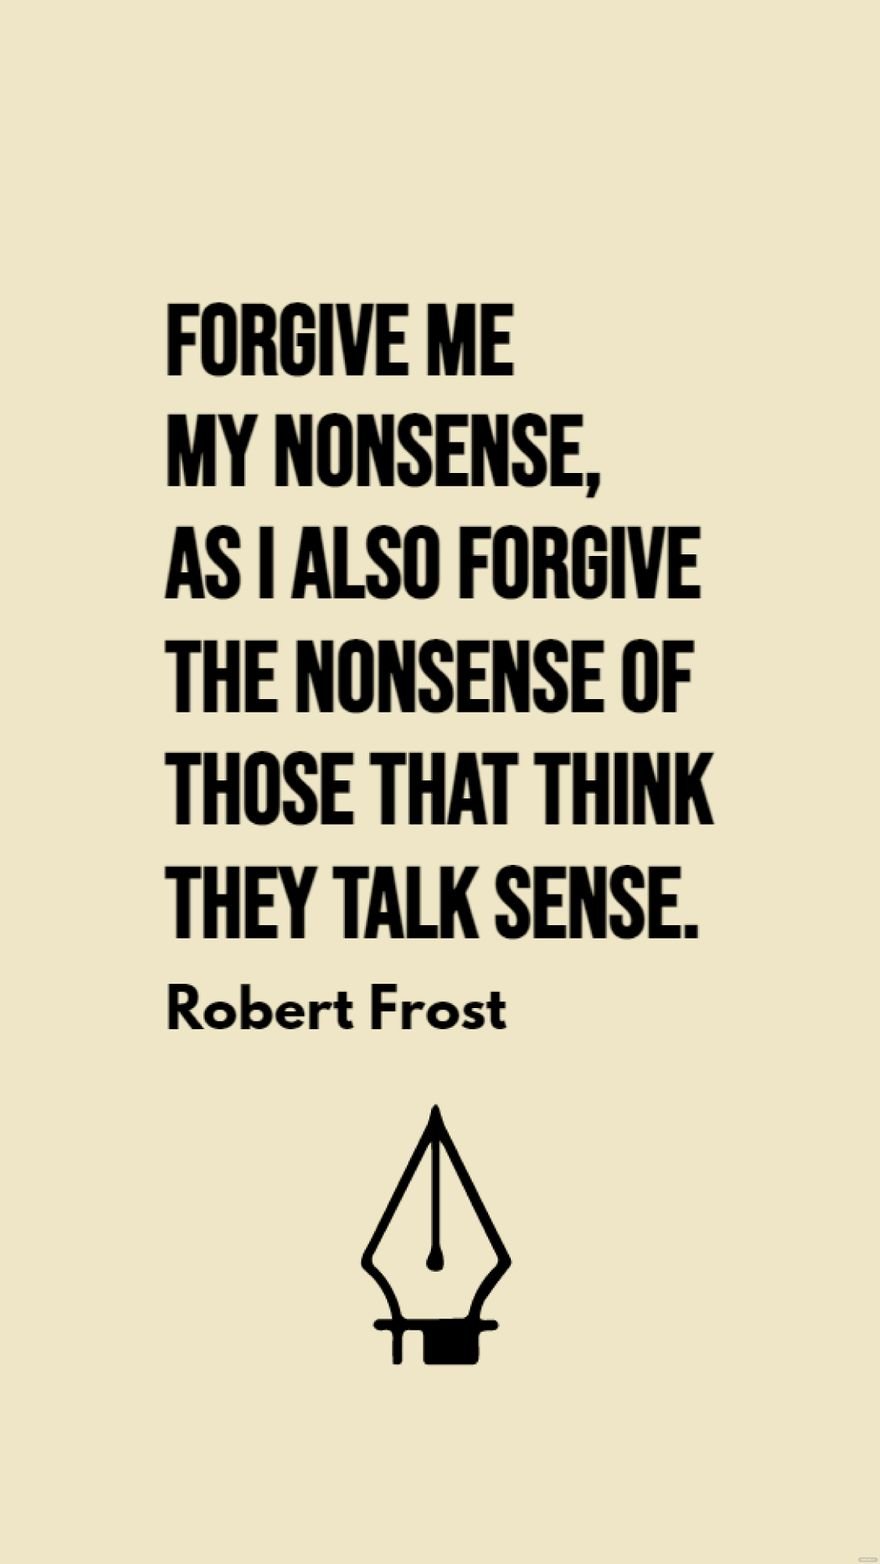 Robert Frost - Forgive me my nonsense, as I also forgive the nonsense of those that think they talk sense.